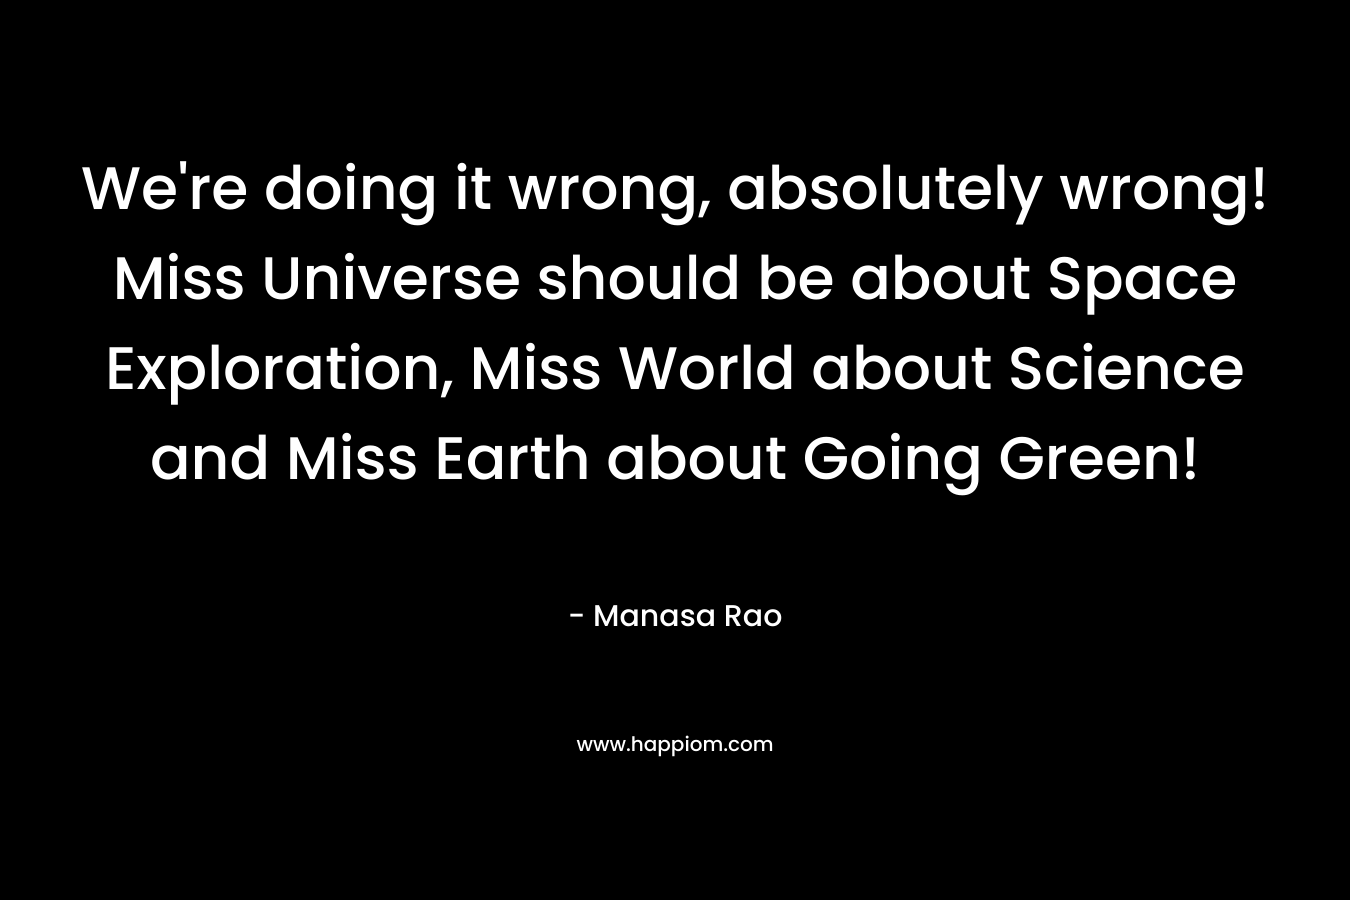 We’re doing it wrong, absolutely wrong! Miss Universe should be about Space Exploration, Miss World about Science and Miss Earth about Going Green! – Manasa Rao